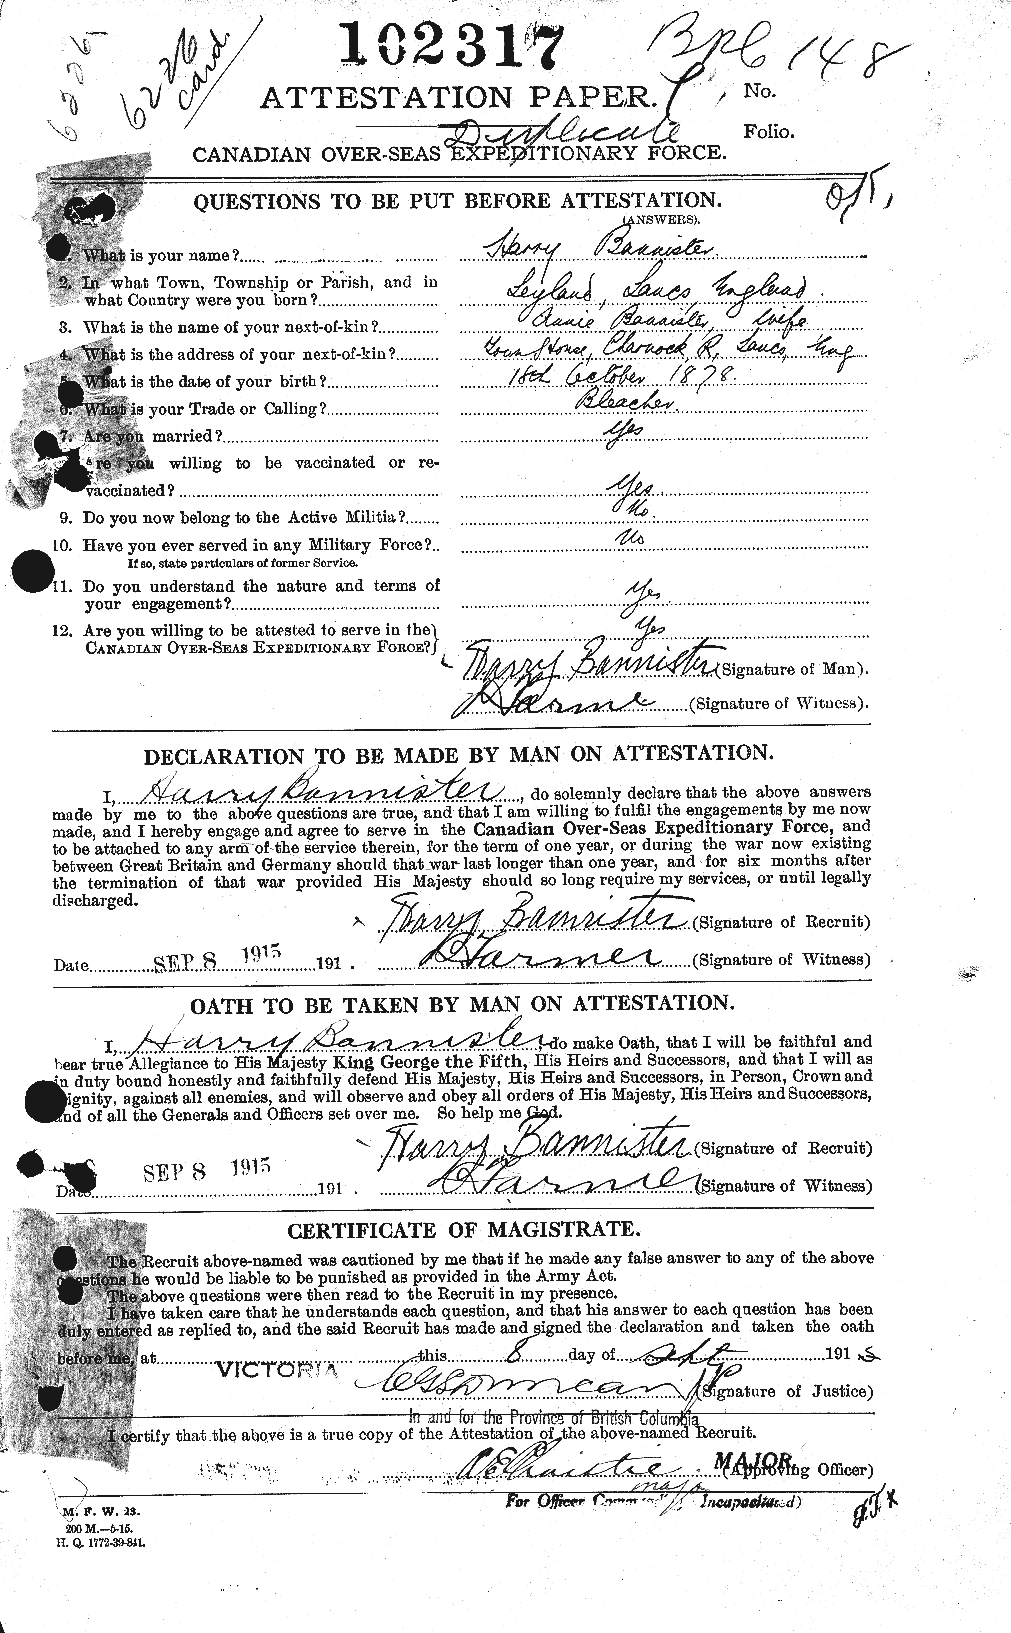 Personnel Records of the First World War - CEF 224792a